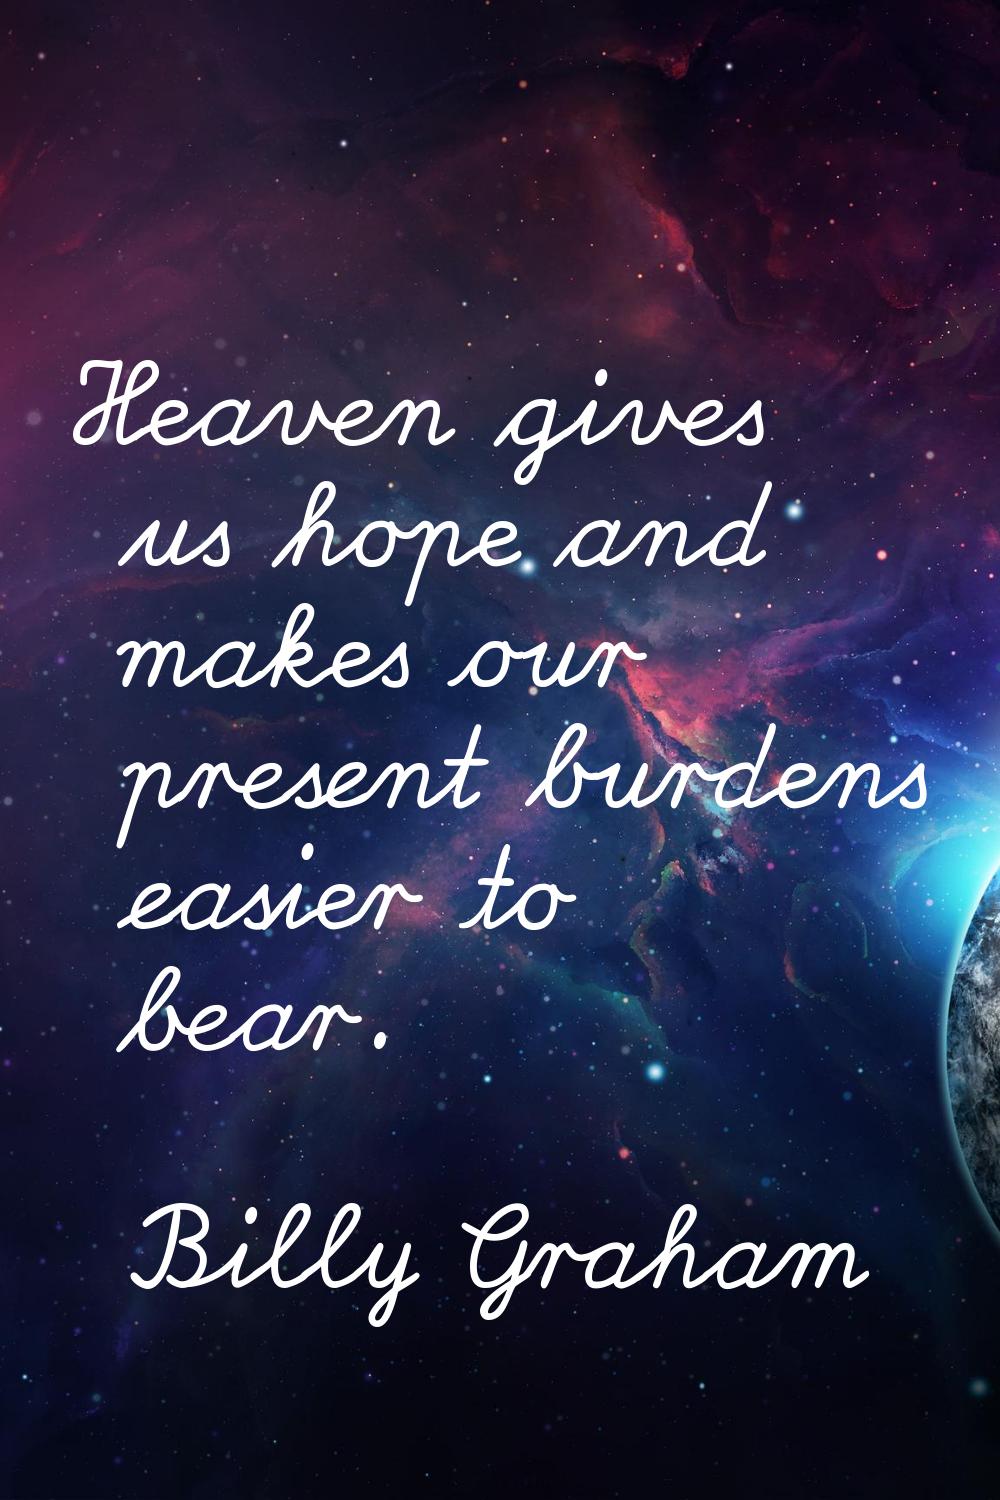 Heaven gives us hope and makes our present burdens easier to bear.